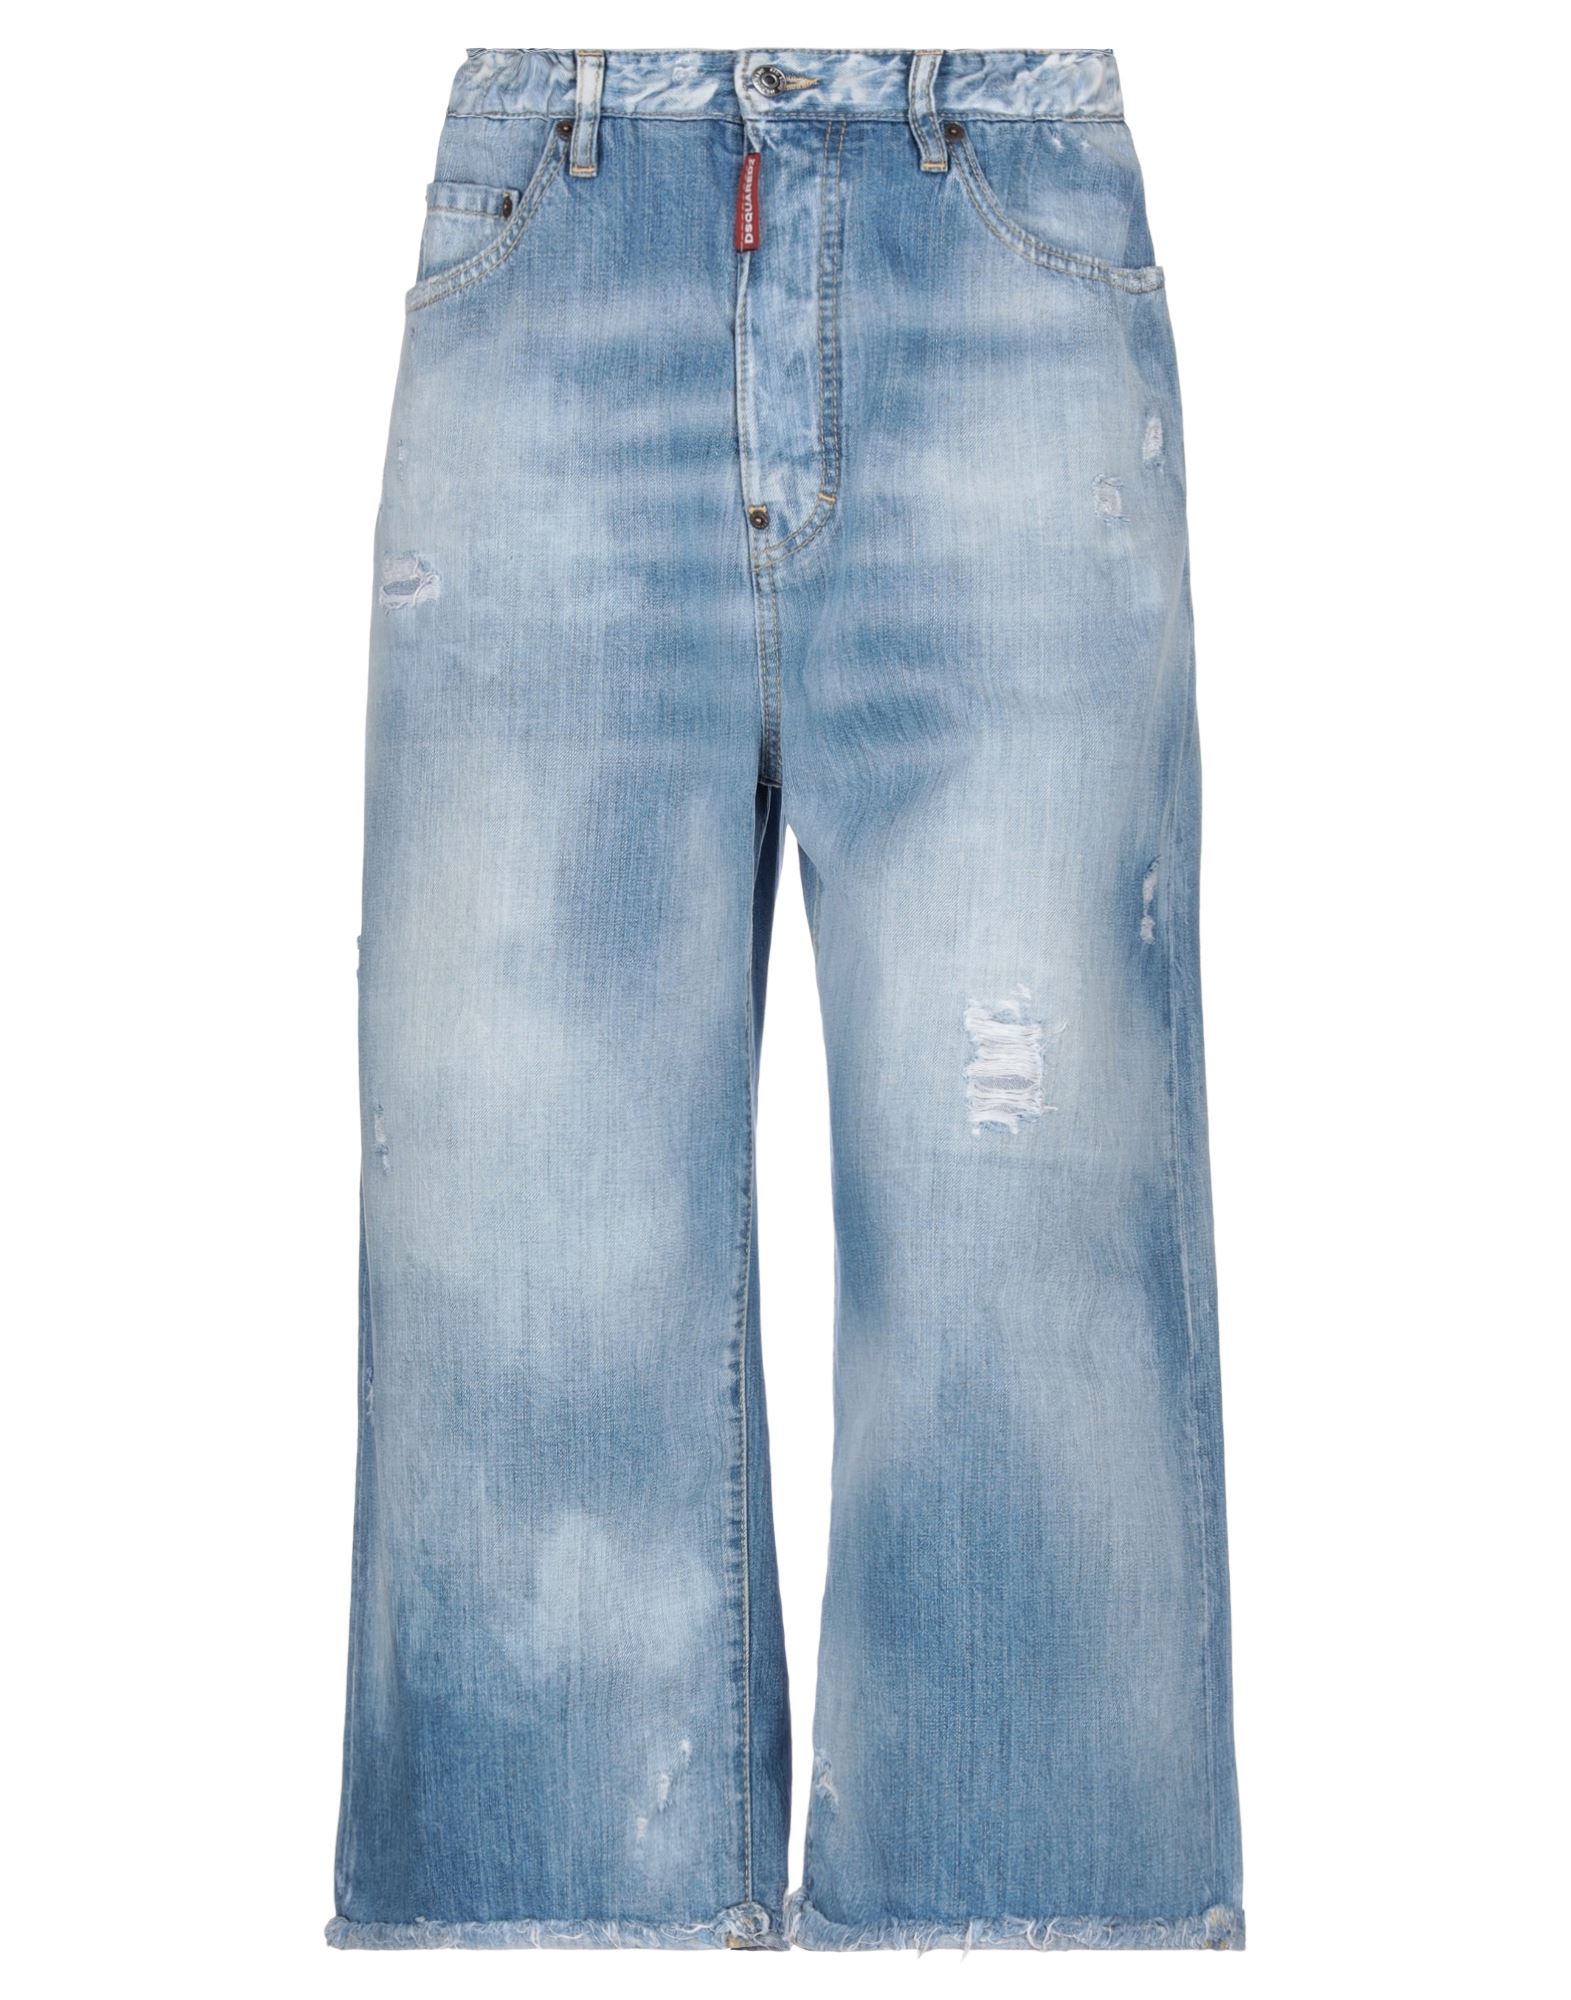 dsquared jeans yoox